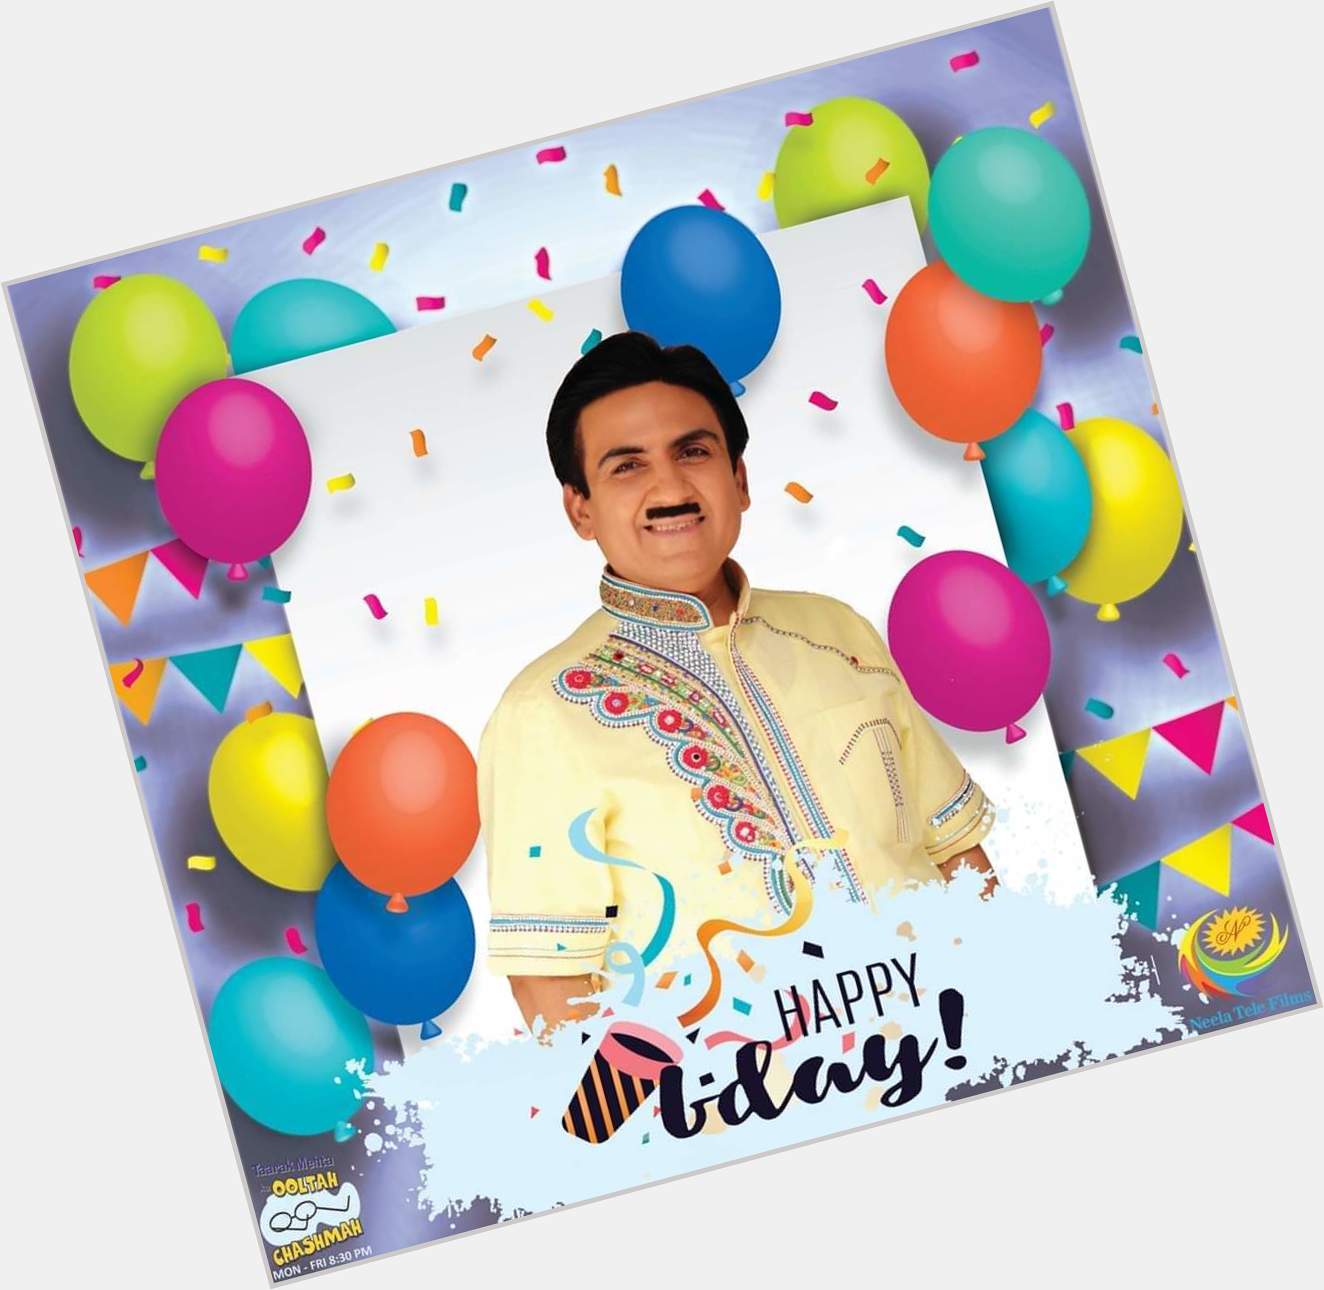 Today is the birthday of our favorite aka Dilip Joshi!!

Happy birthday 